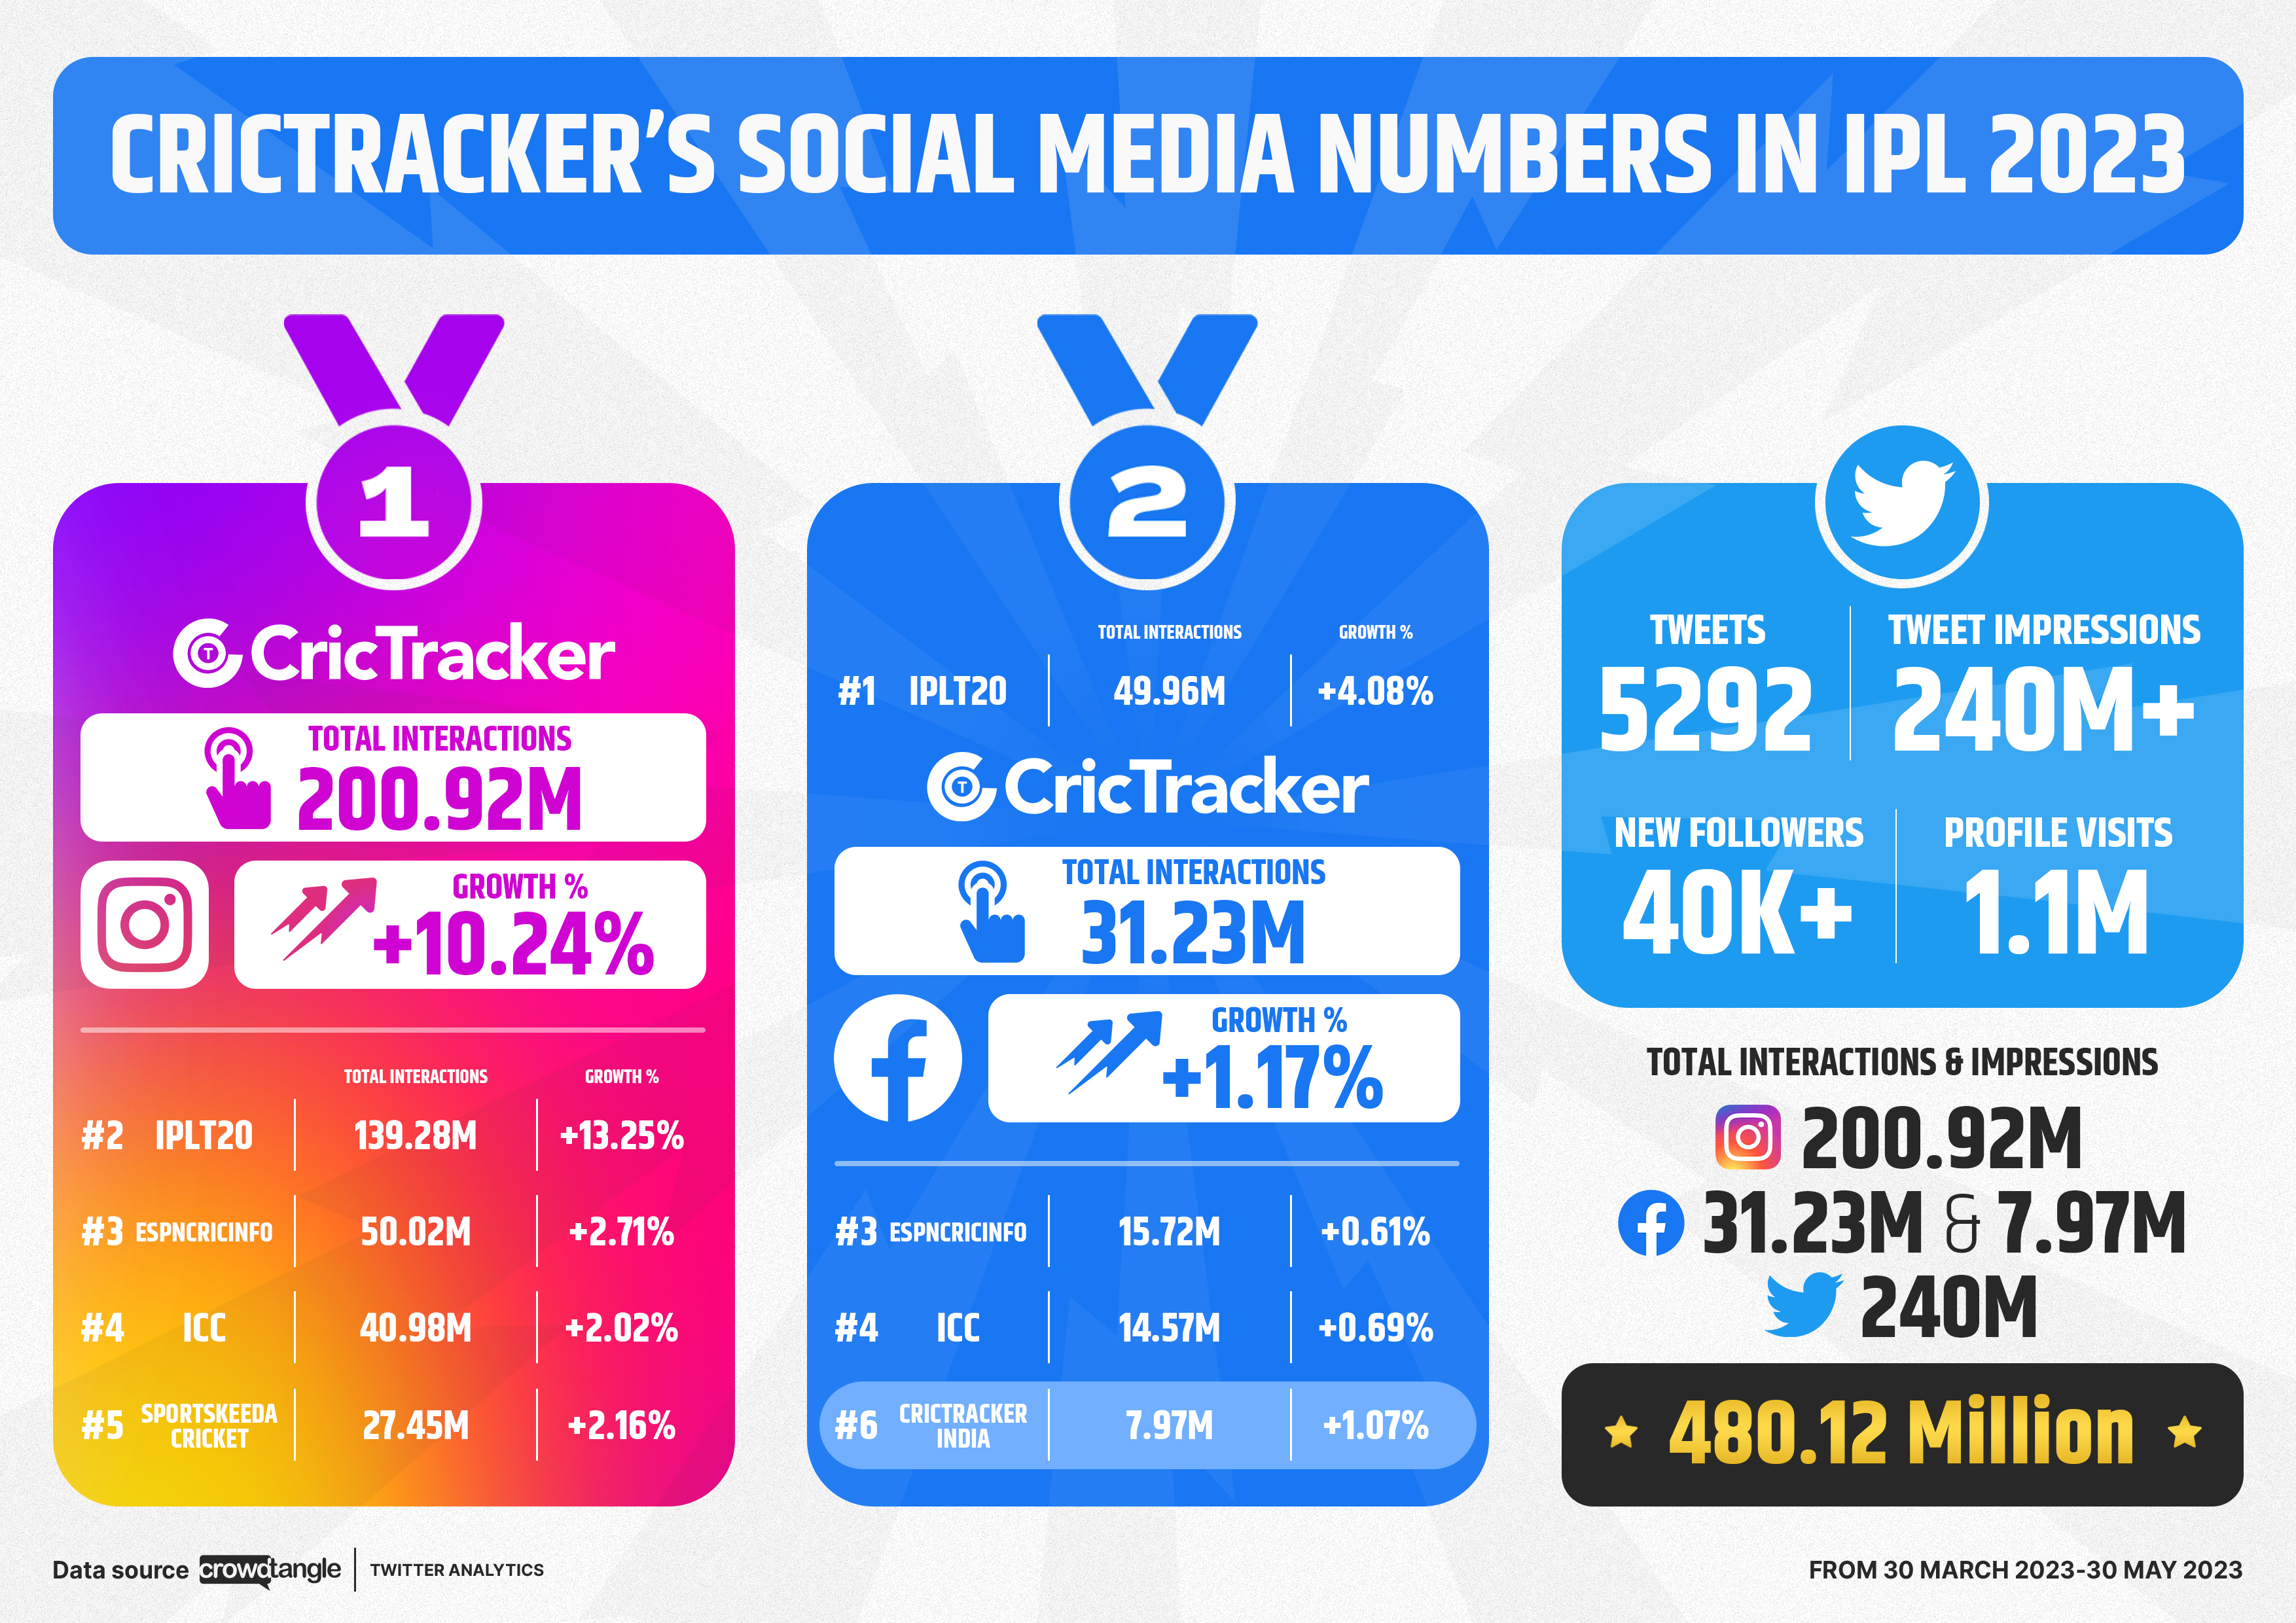 CricTracker's Social Media in numbers